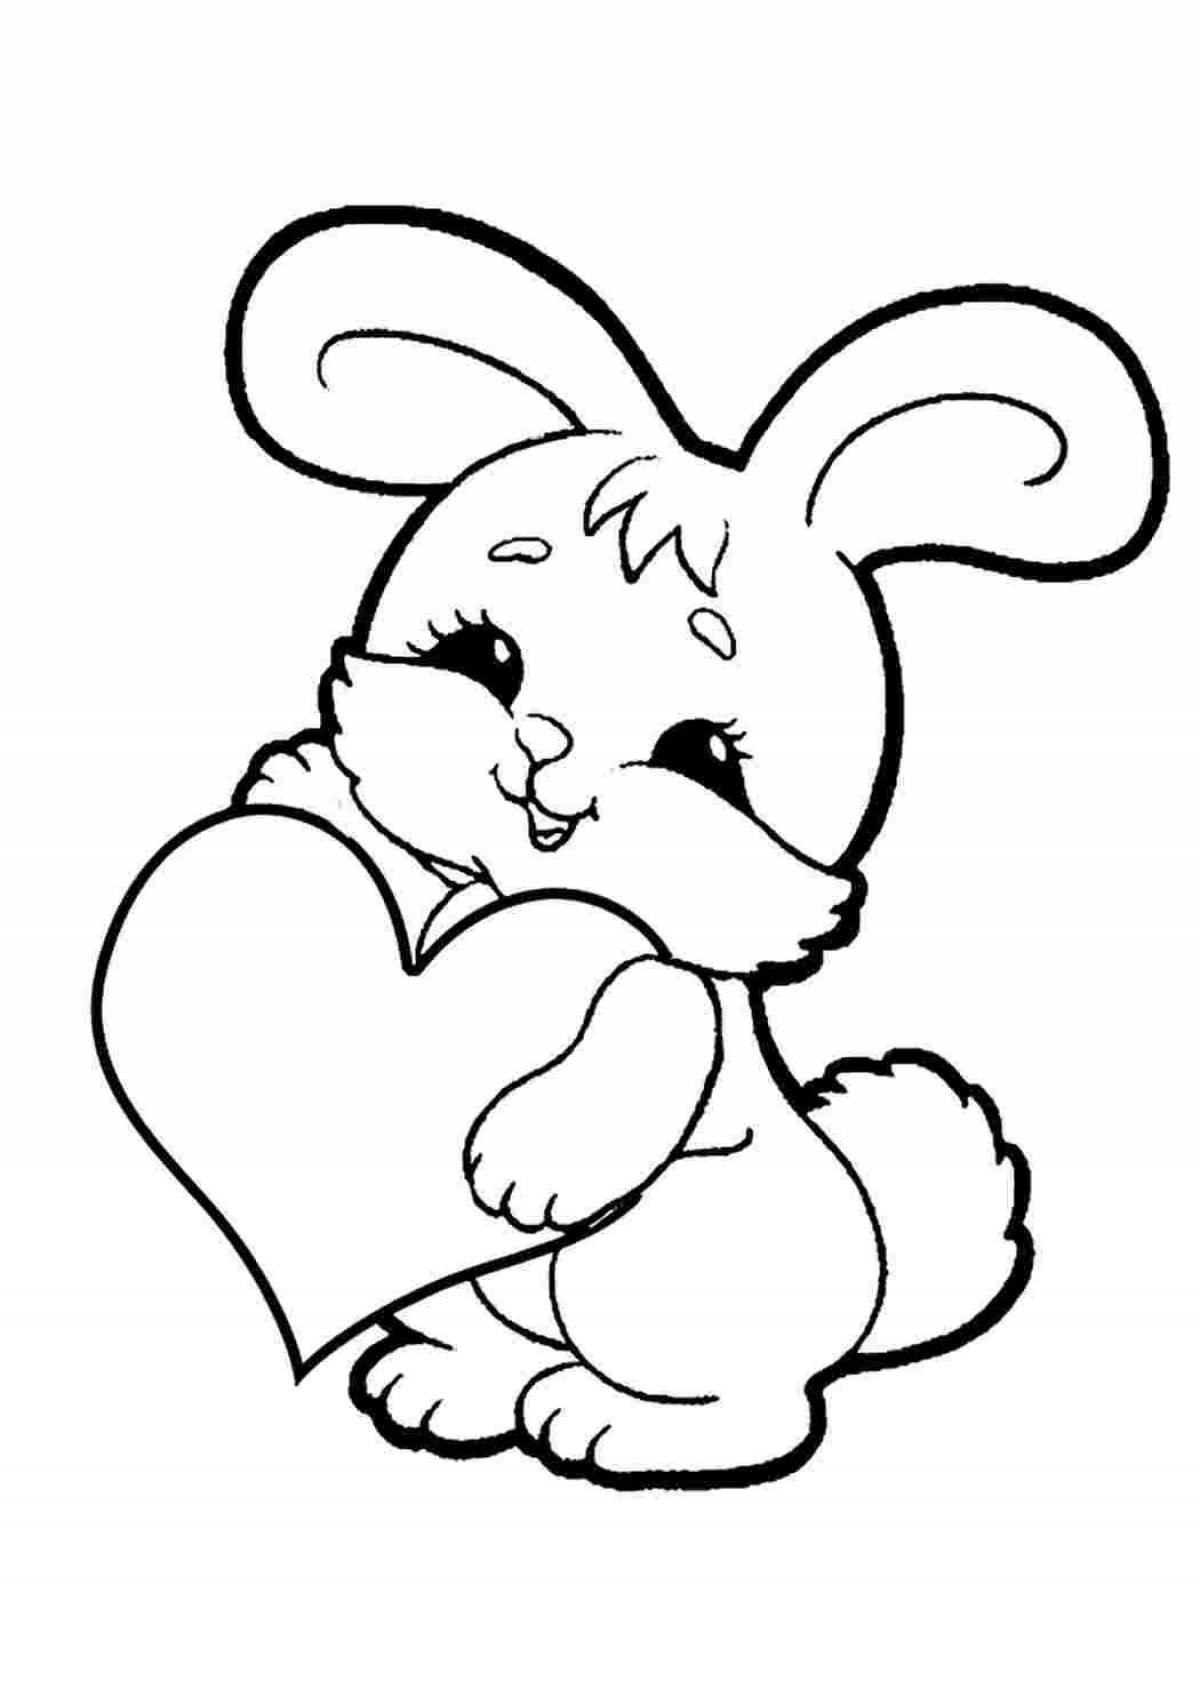 Bright and cute bunny coloring book